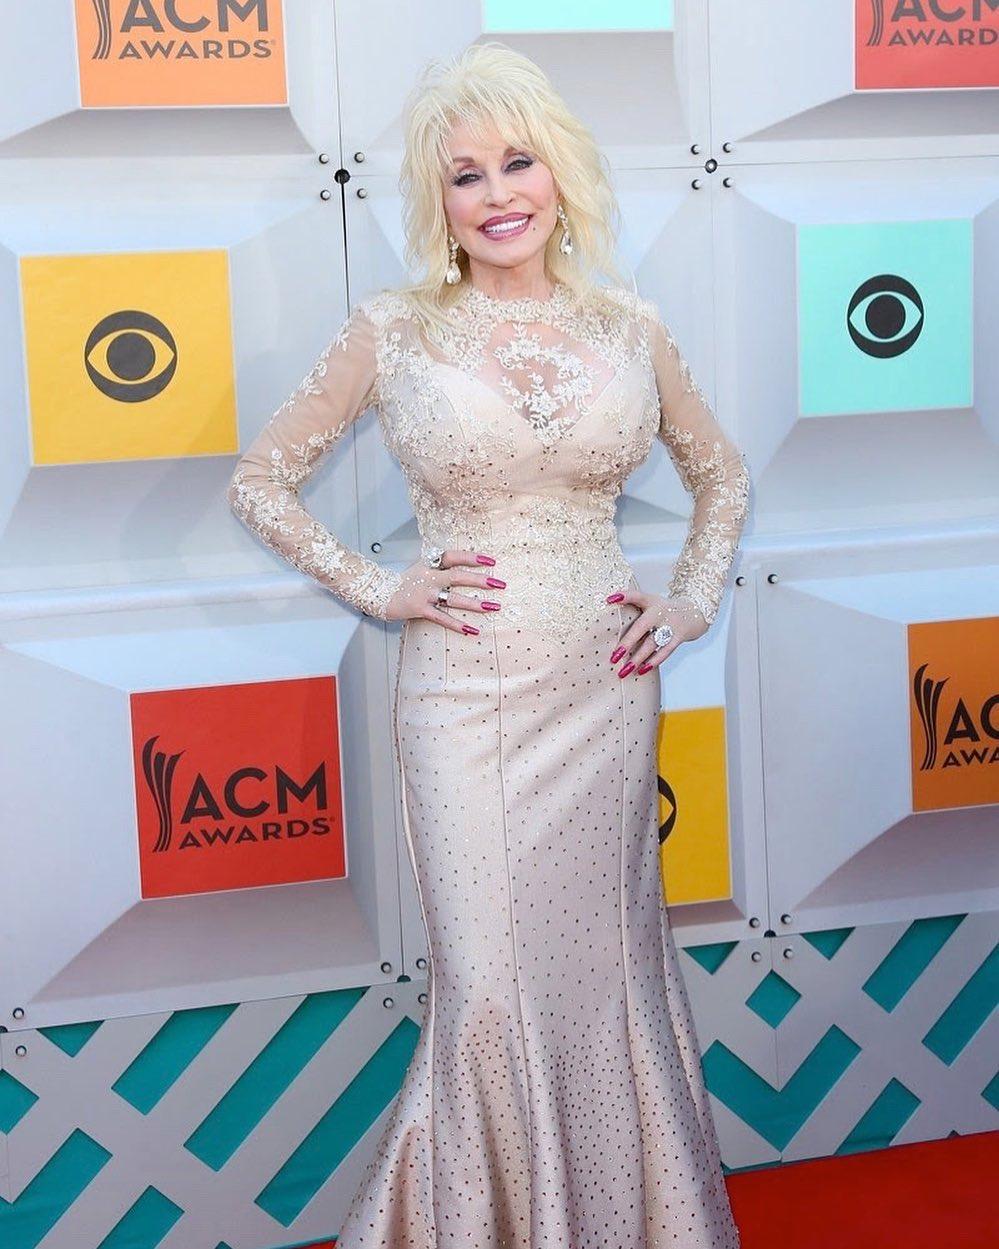 Dolly Parton looks incredible in this net dress at an event